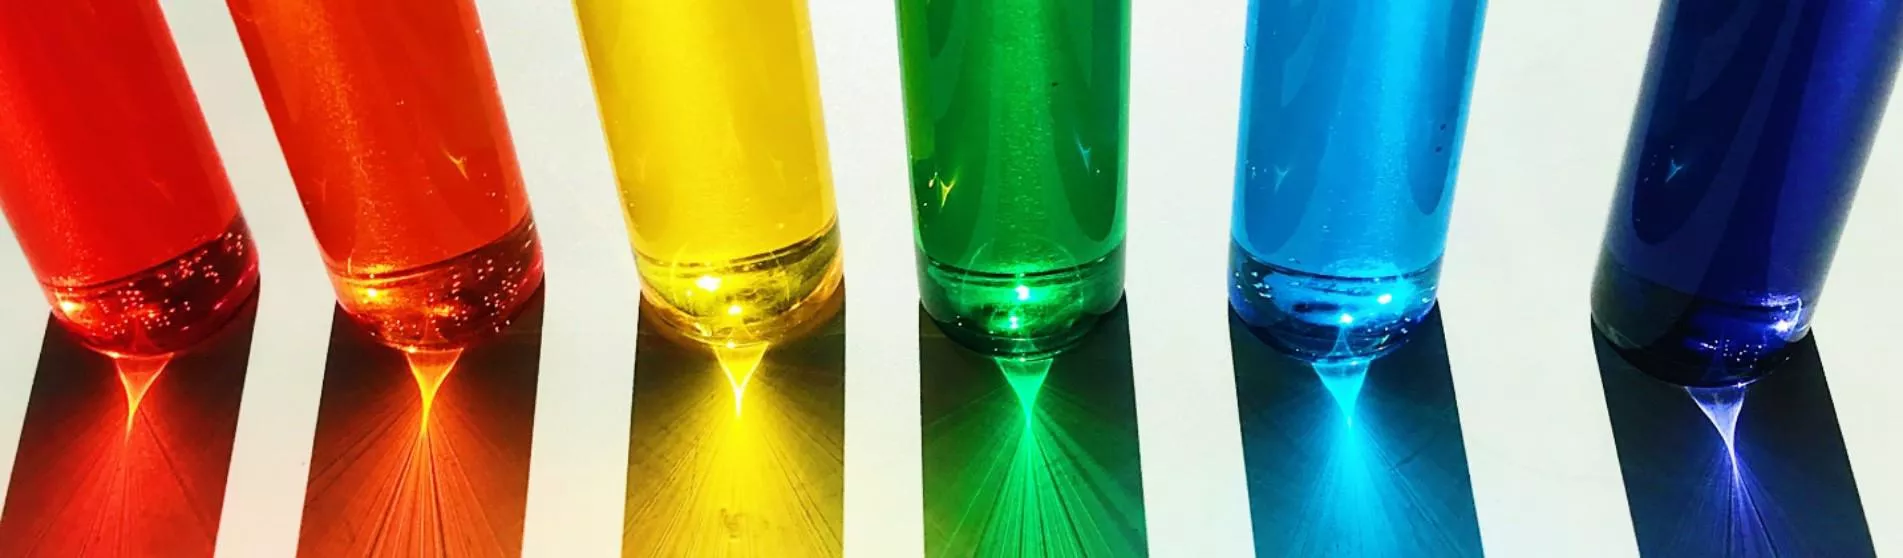 Photo of 6 narrow glasses next to each other, representing the rainbow in the colour of their respective liquid - from left to right: red, orange, yellow, green, sky blue, dark blue.